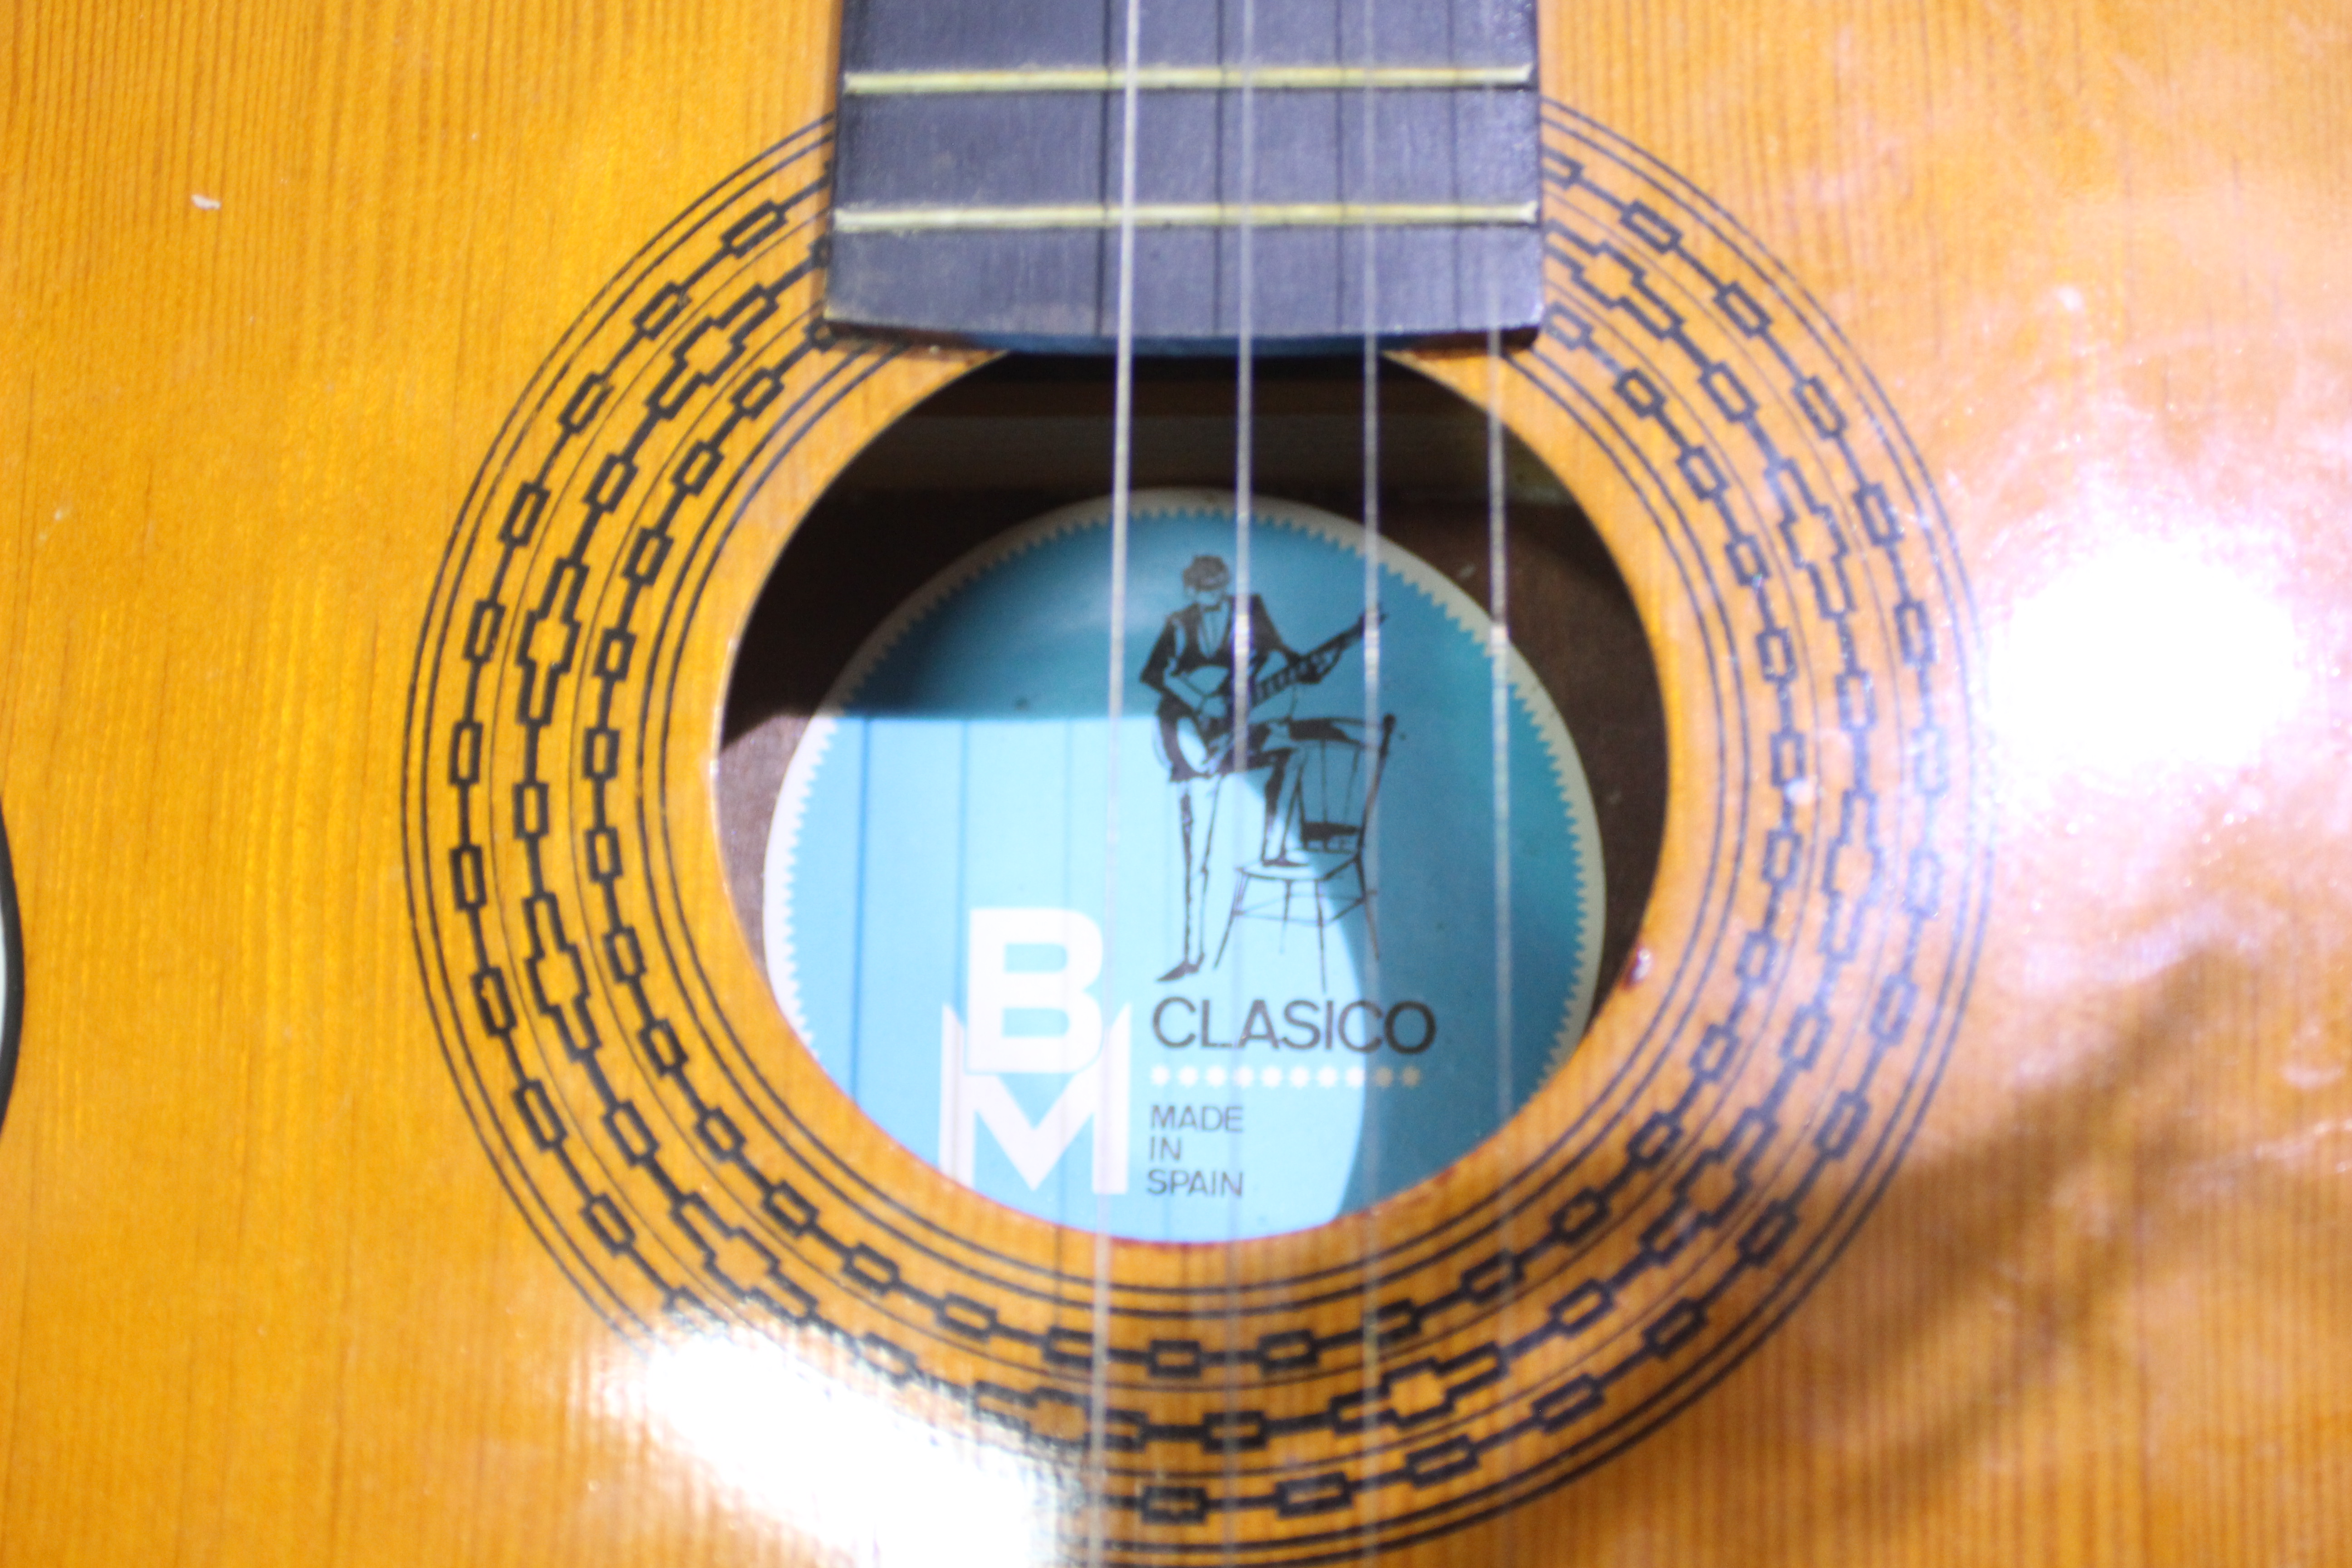 A BM Clasico Spanish made acoustic guitar. Appears in good condition. - Bild 2 aus 4